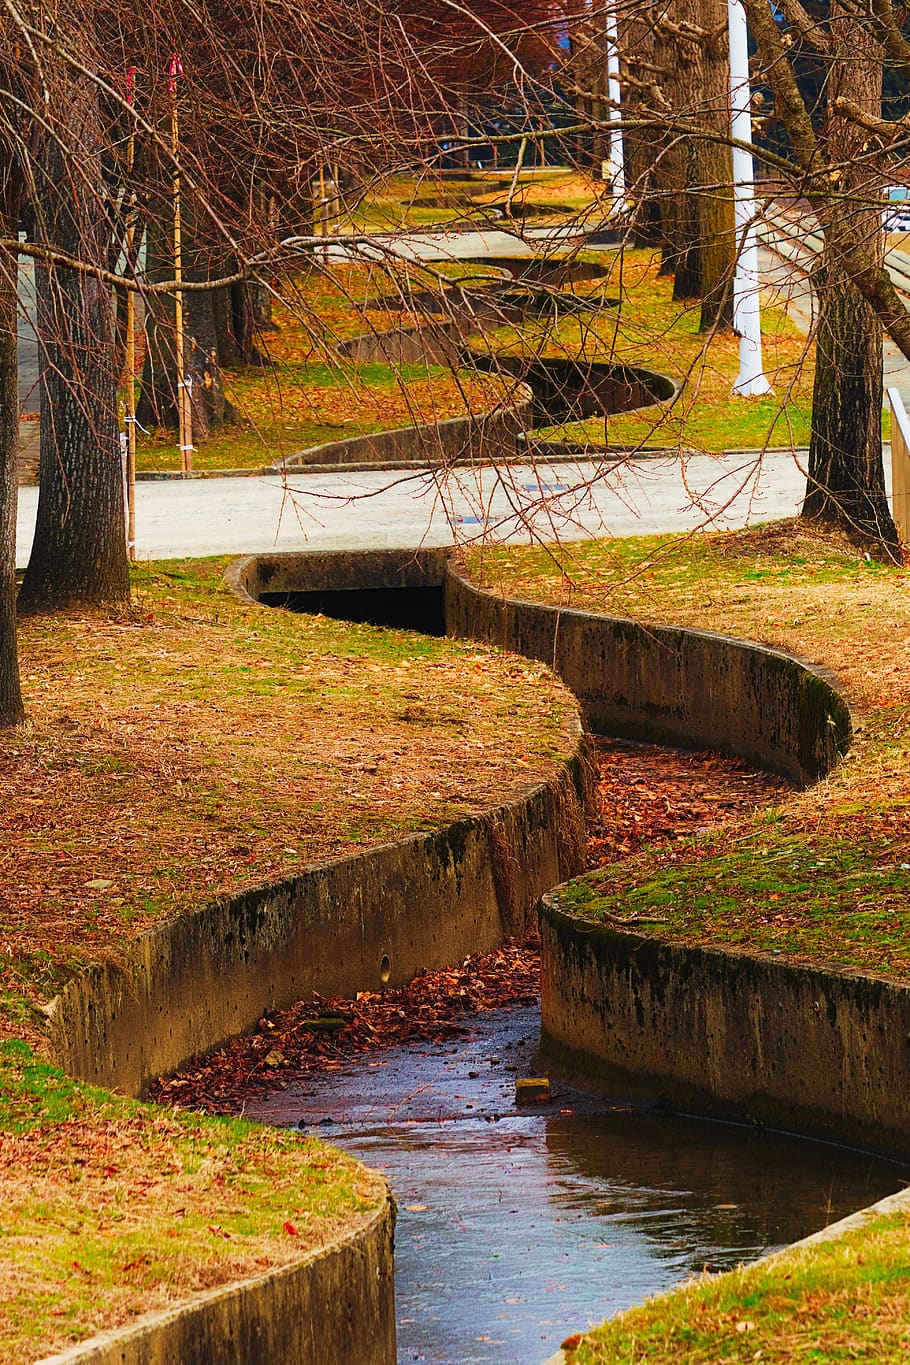 winding canal, cold, winter, landscape, water, pattern, curvy, tree, plant, nature